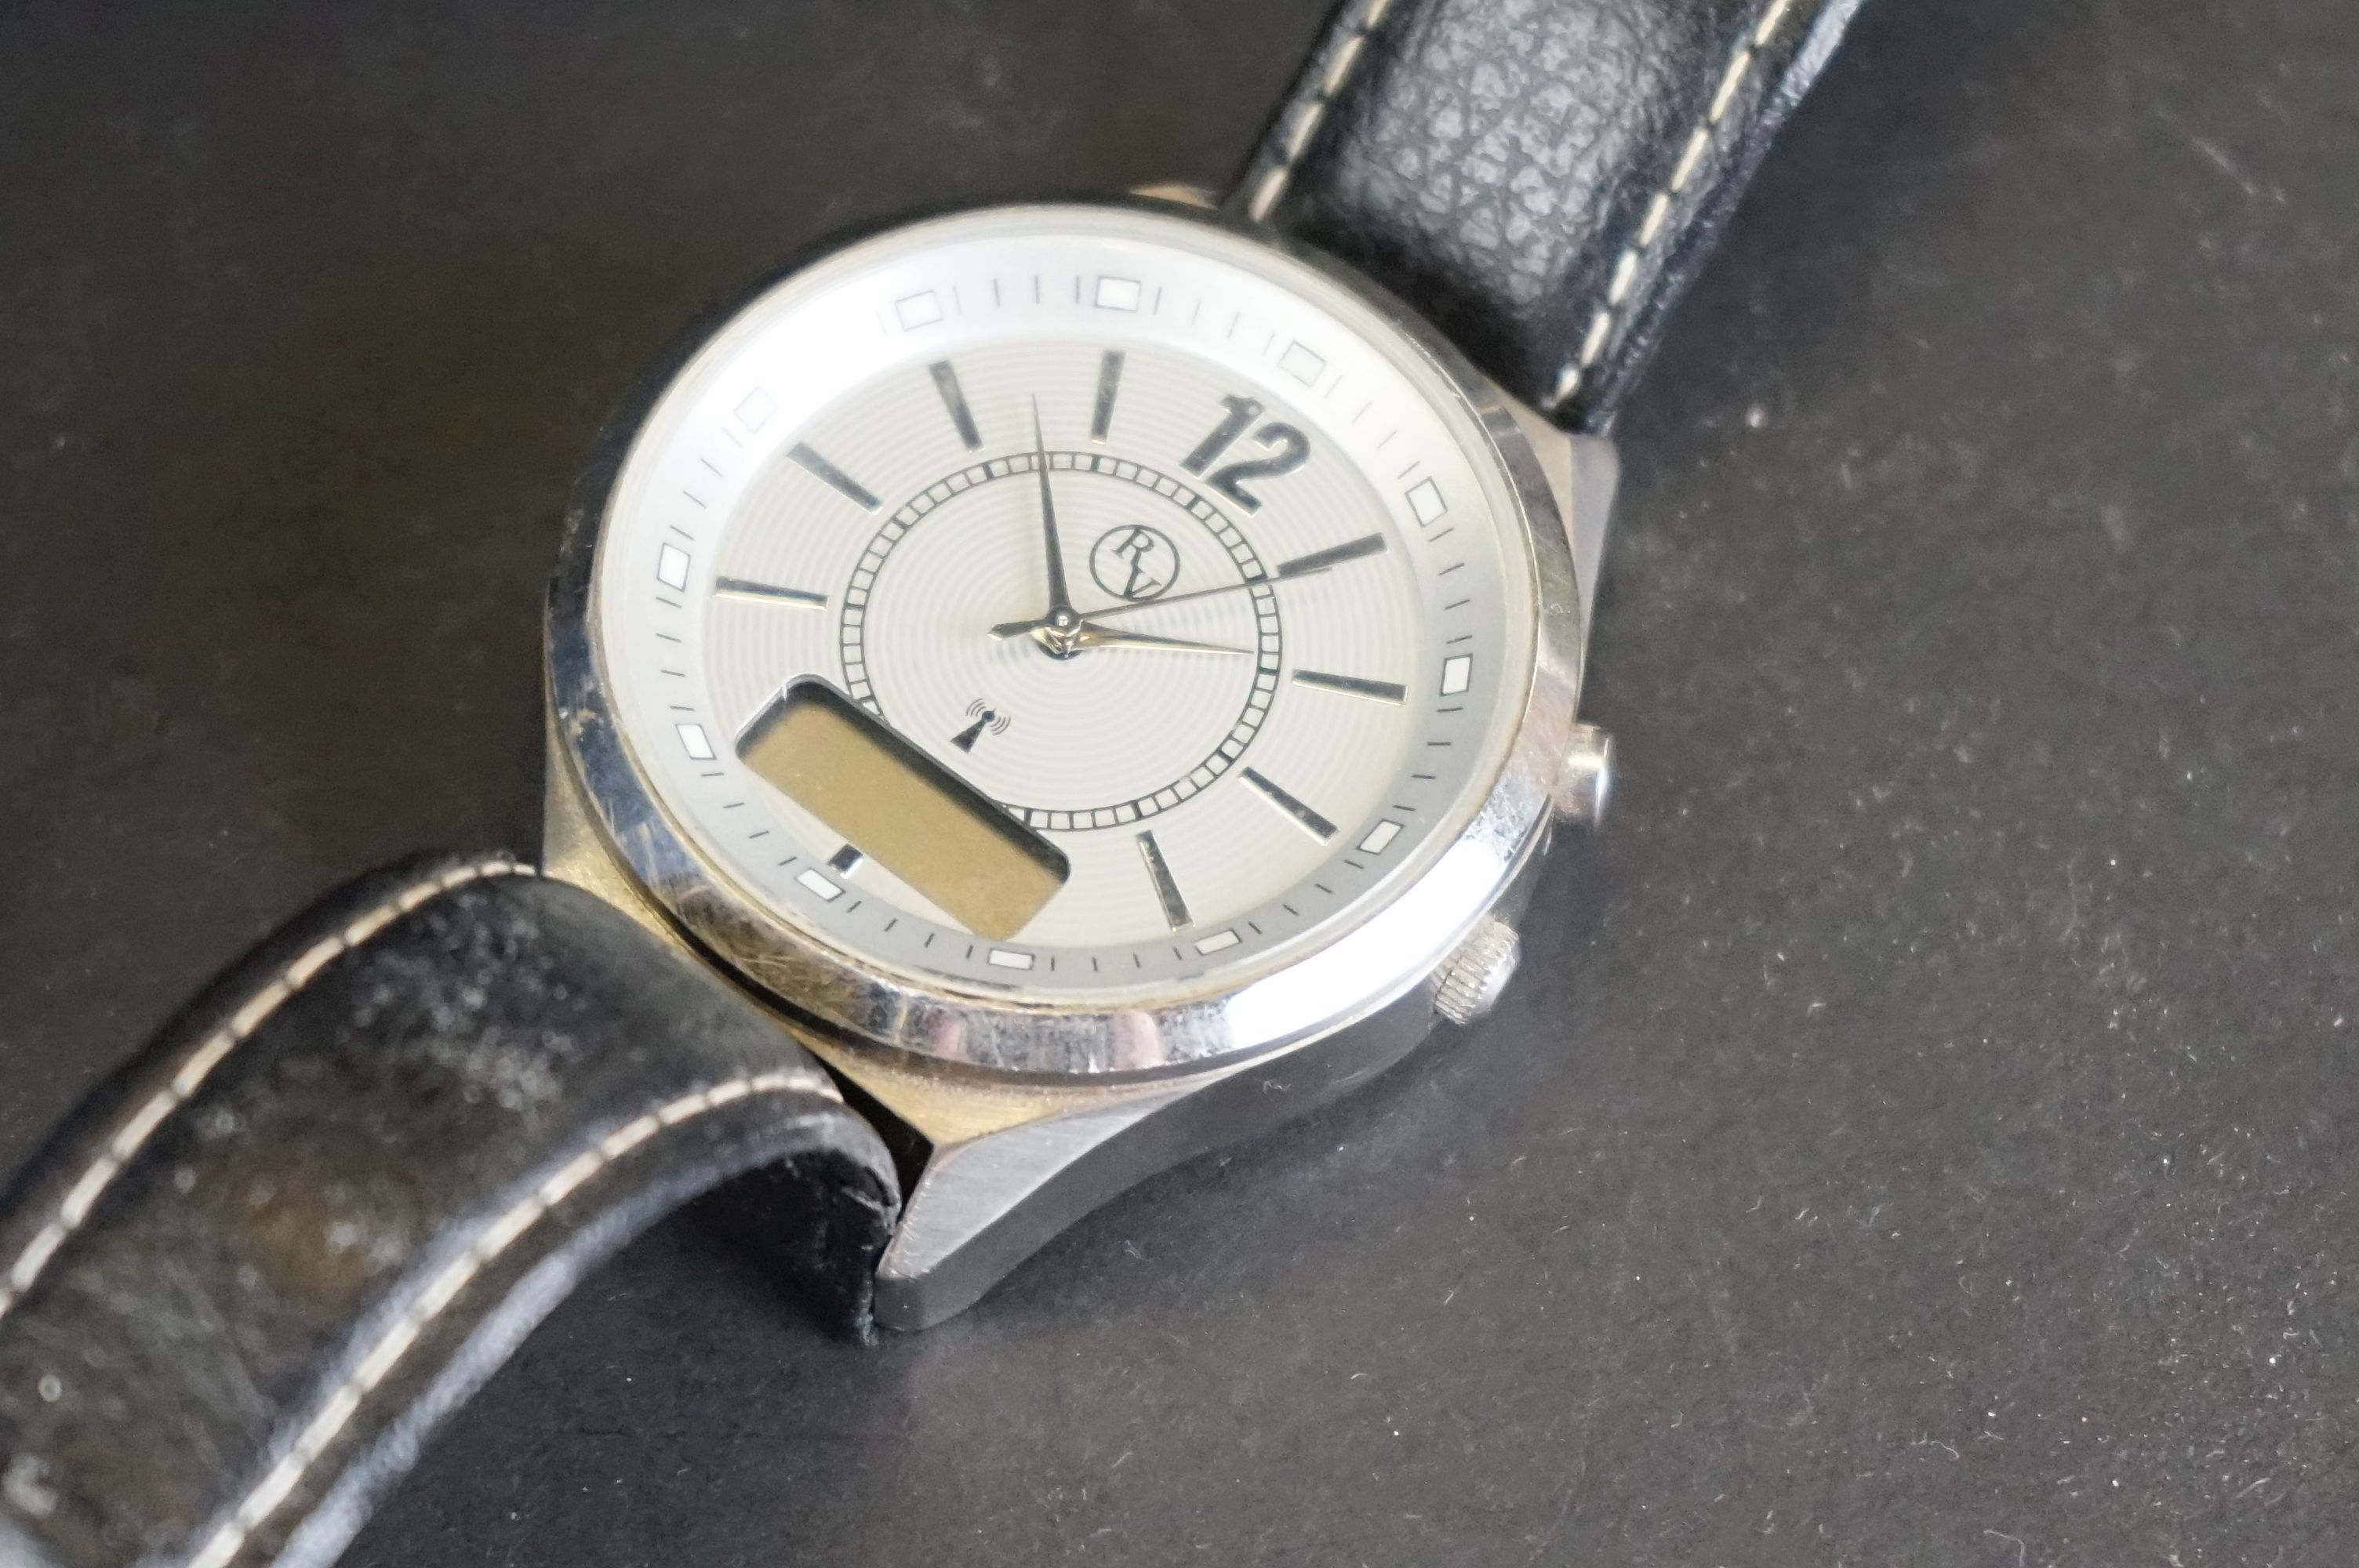 Assorted watches to include Identity, Ben Sherman, Rotary, World Time, Chronographs, etc - Image 6 of 9